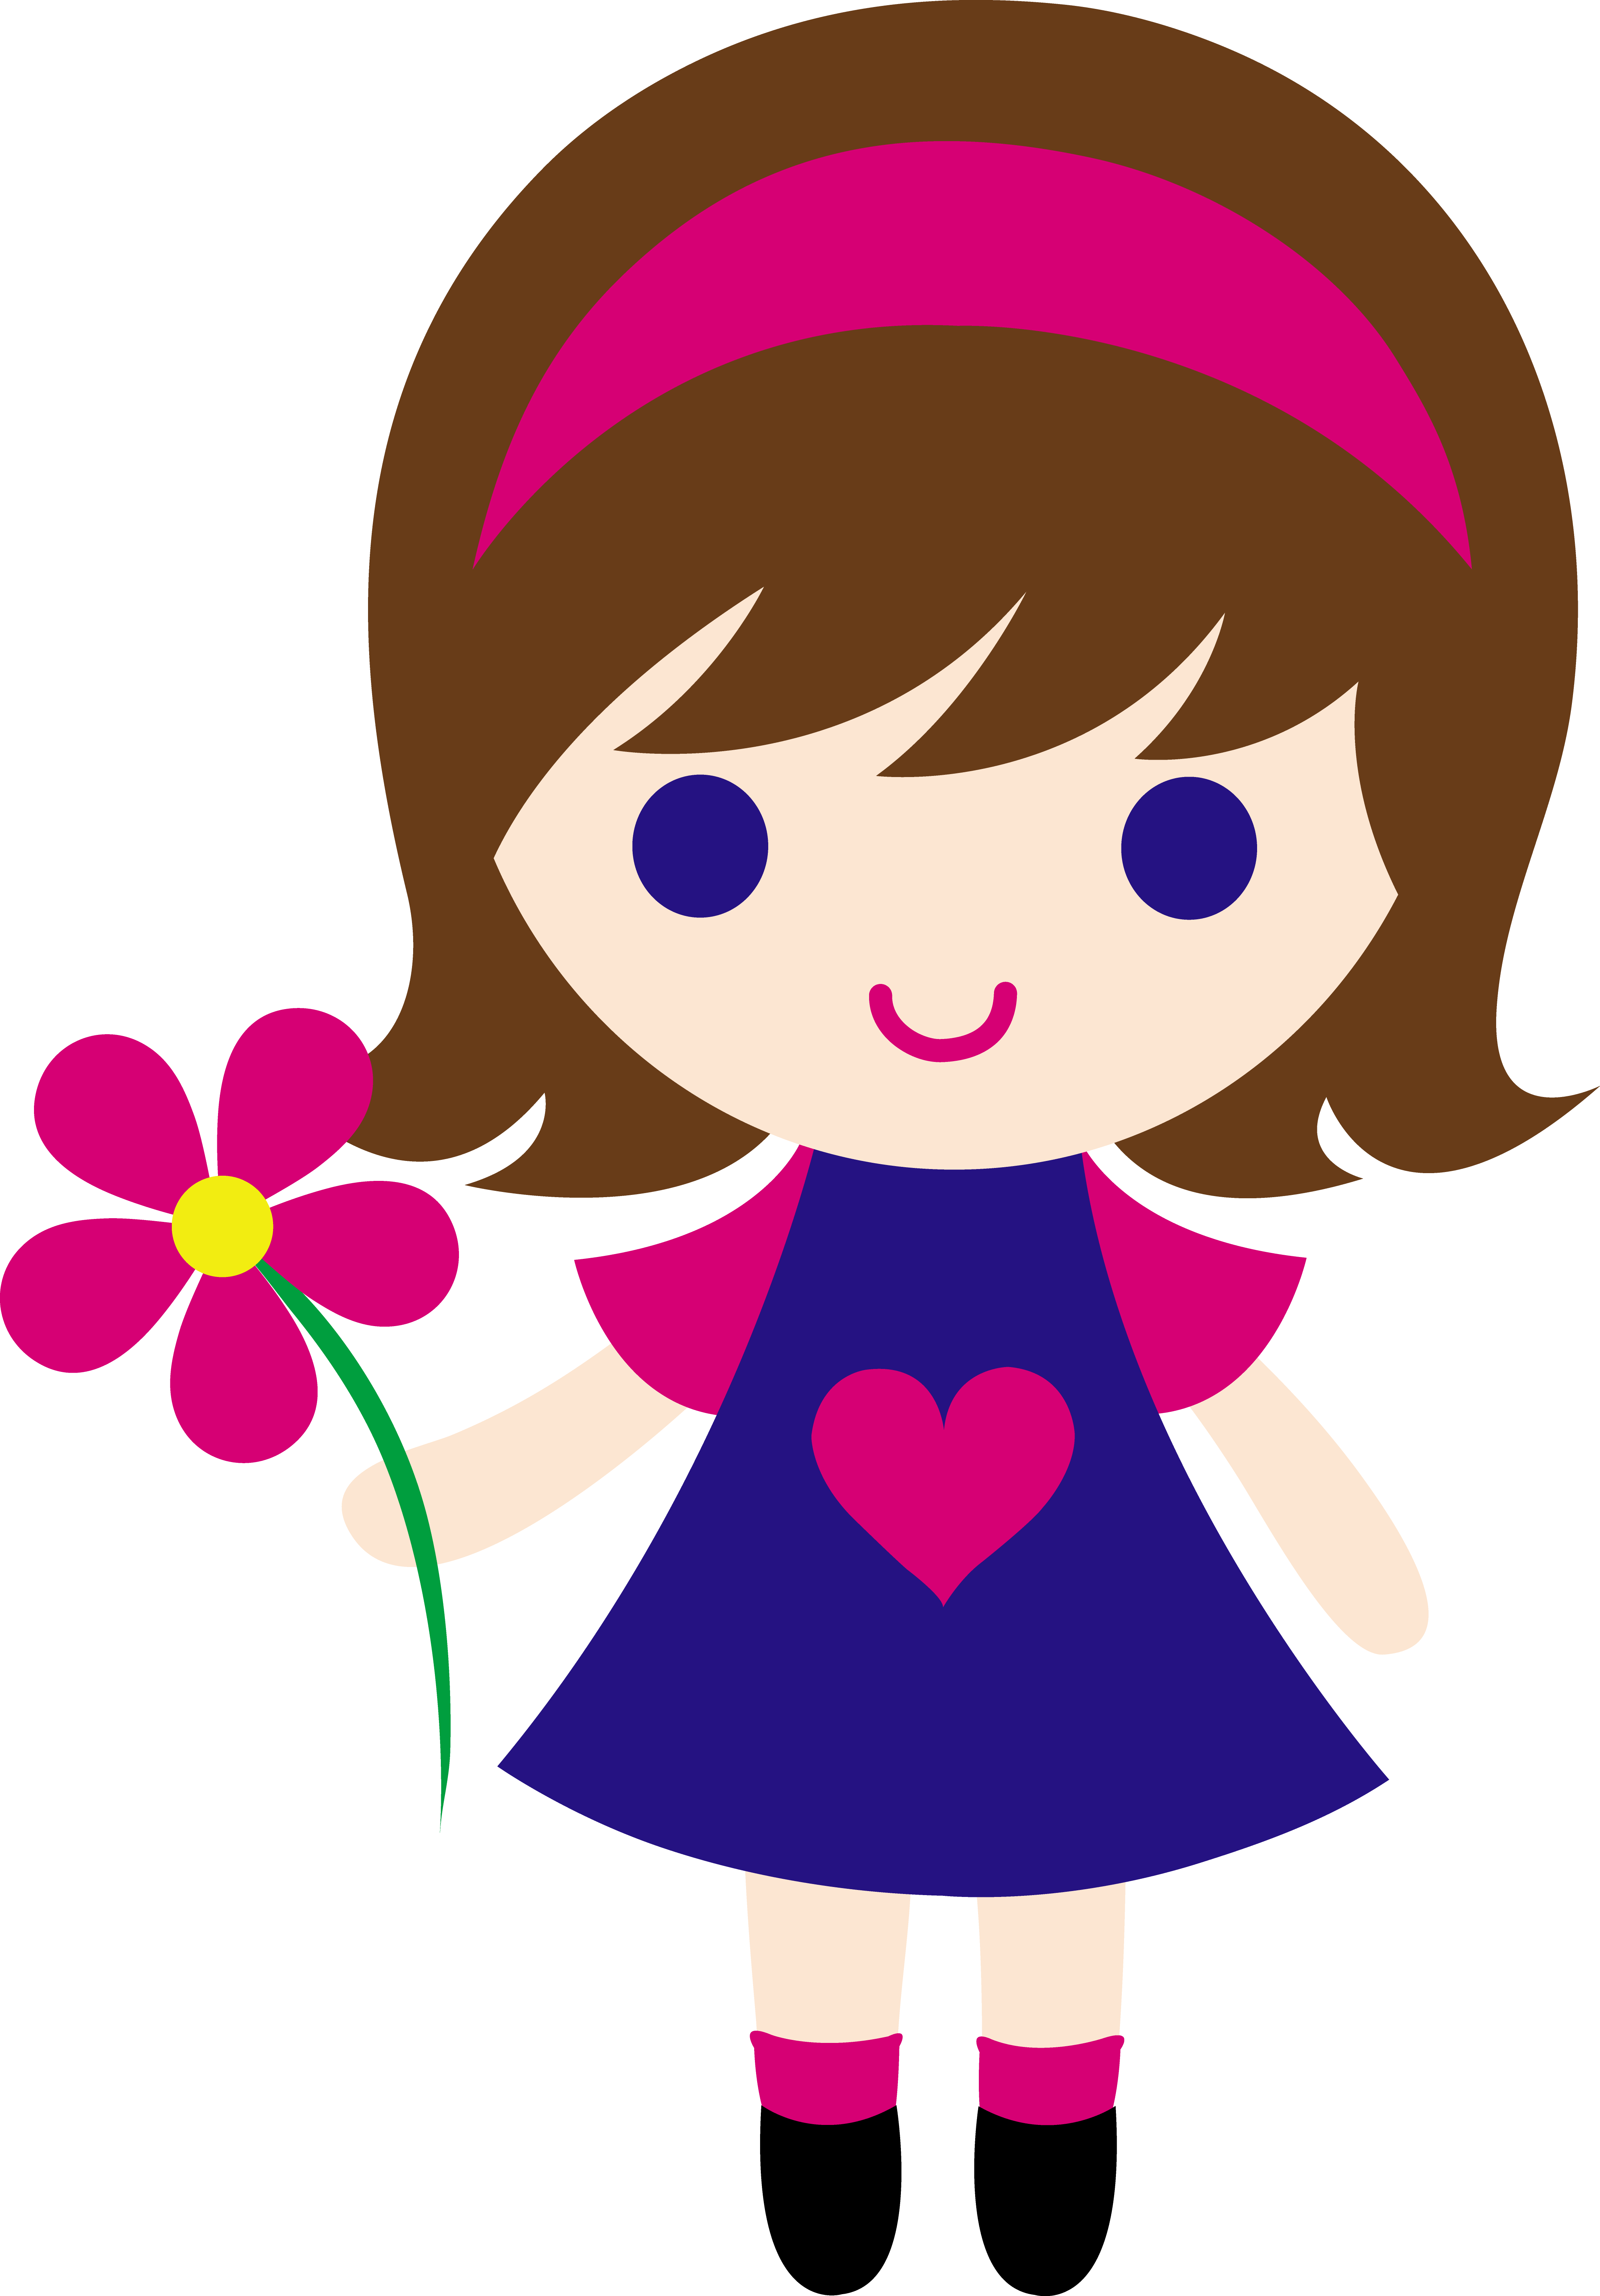 Cute Little Girl Holding Daisy Free clipart free image.